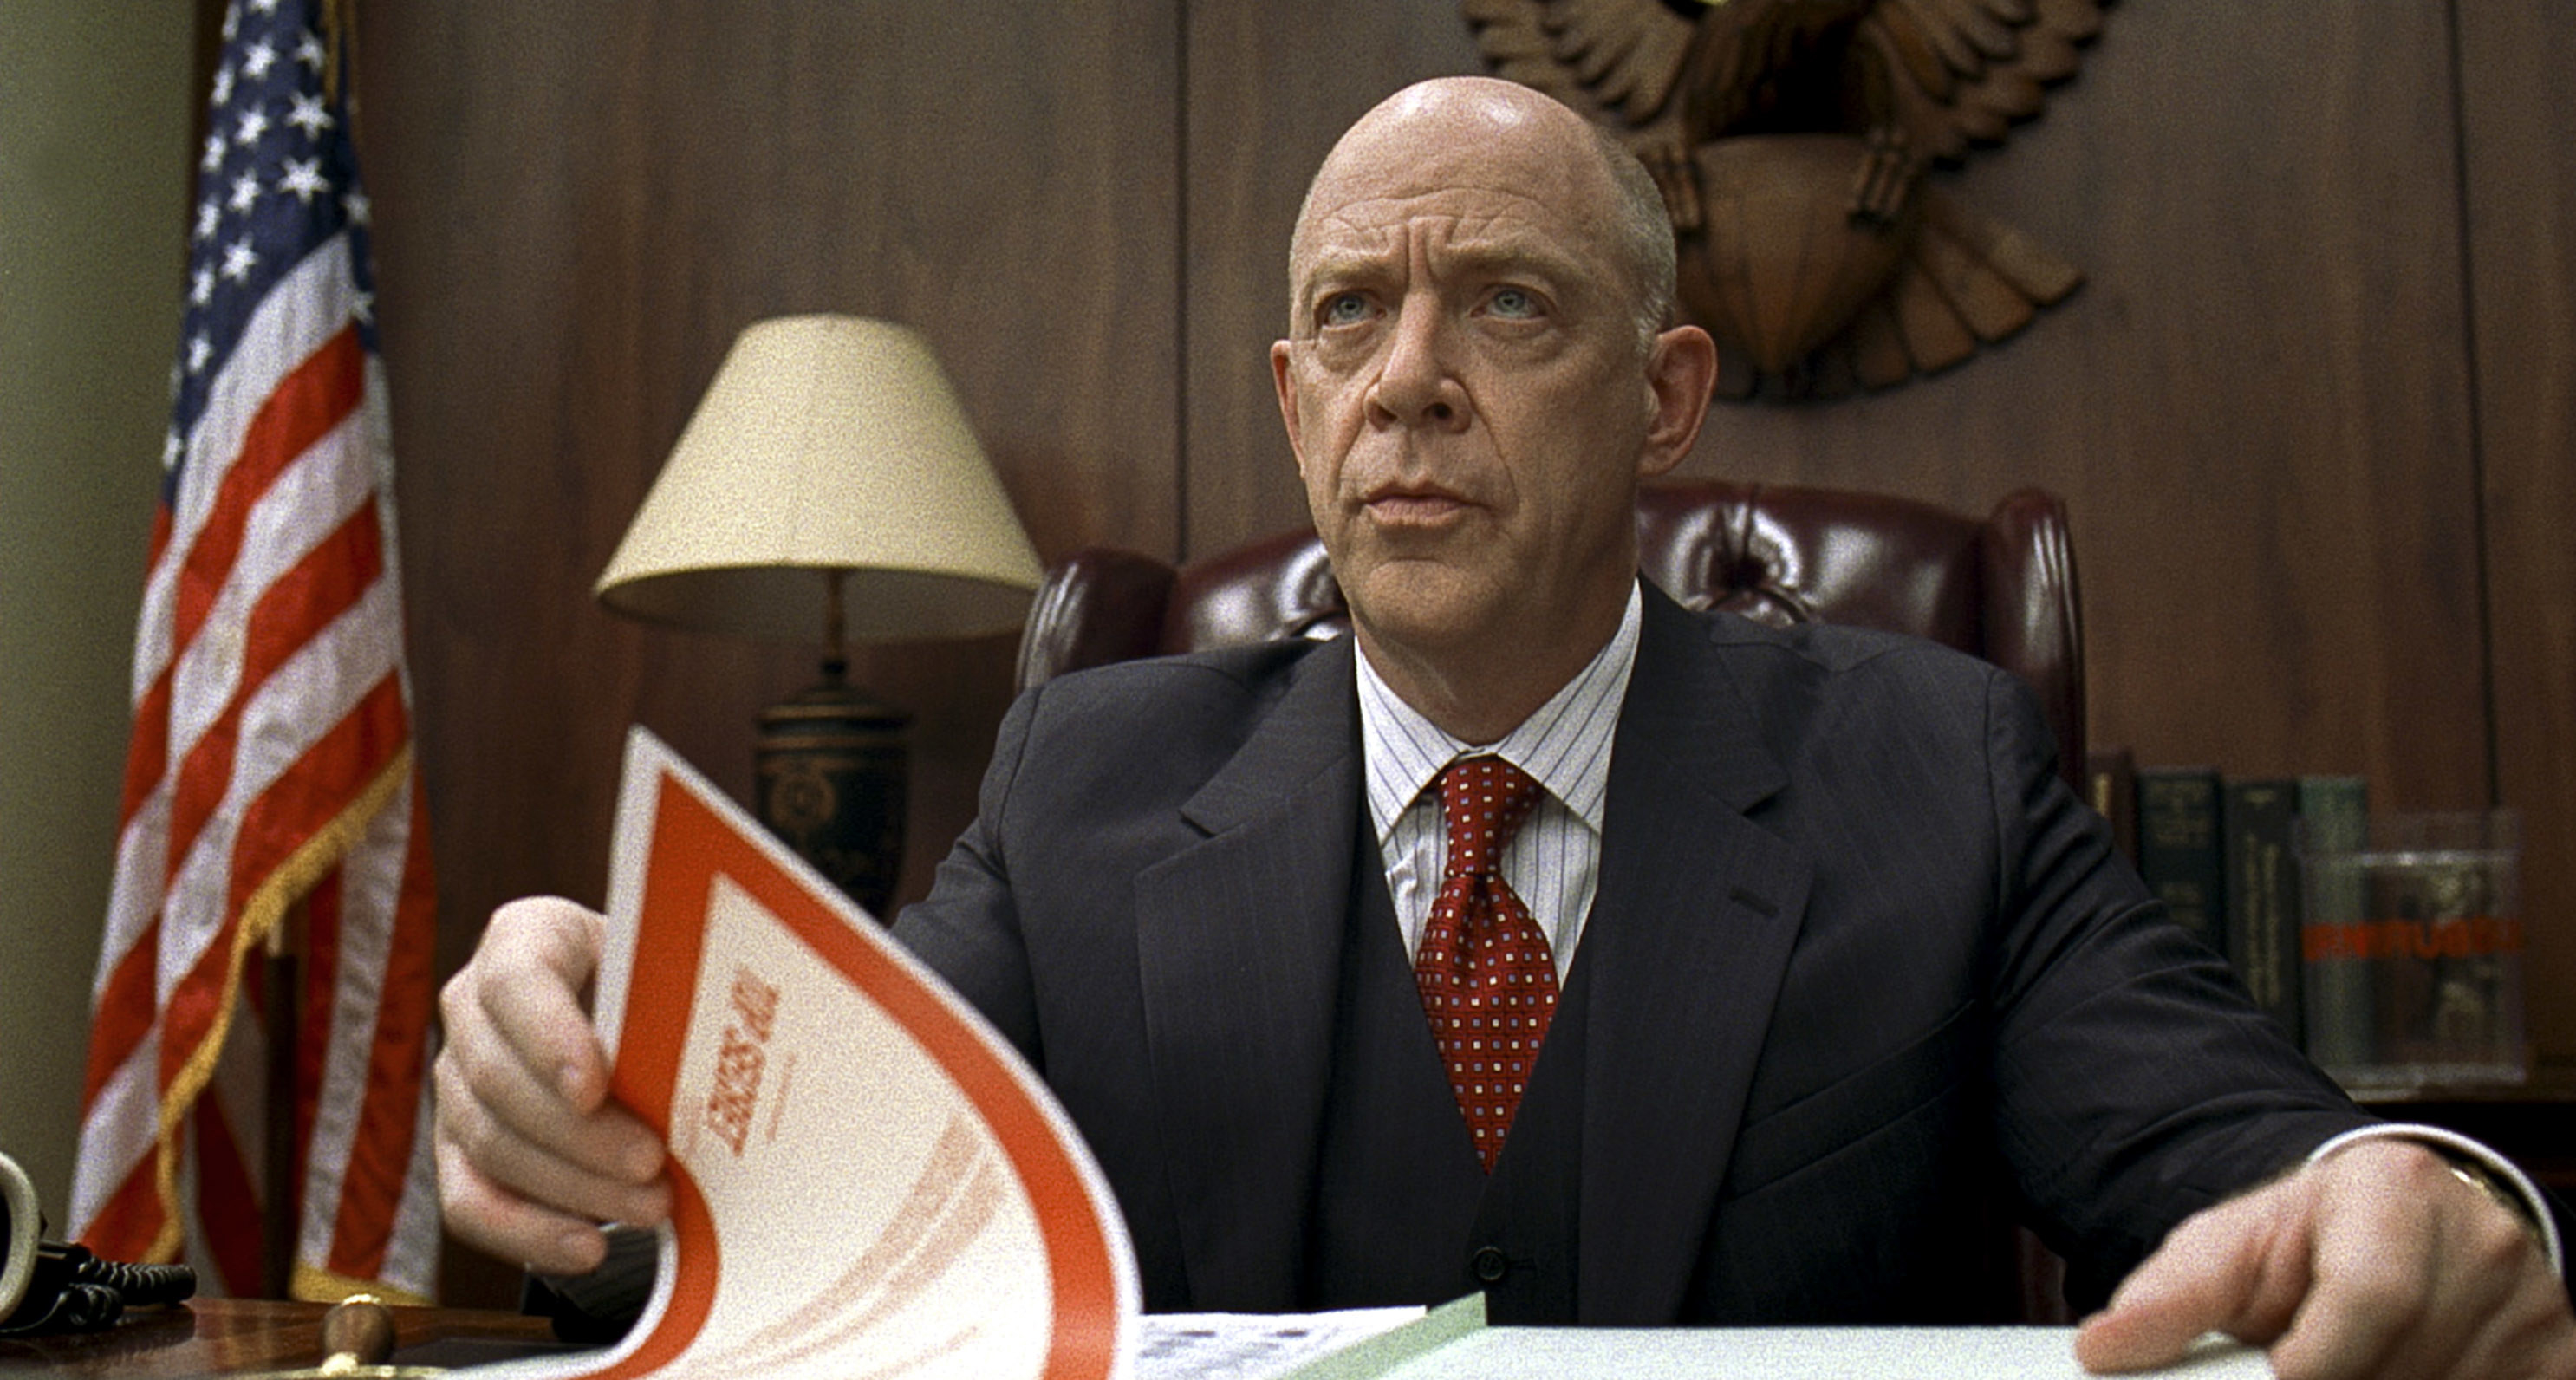 J.K. Simmons looking perplexed sitting at a desk